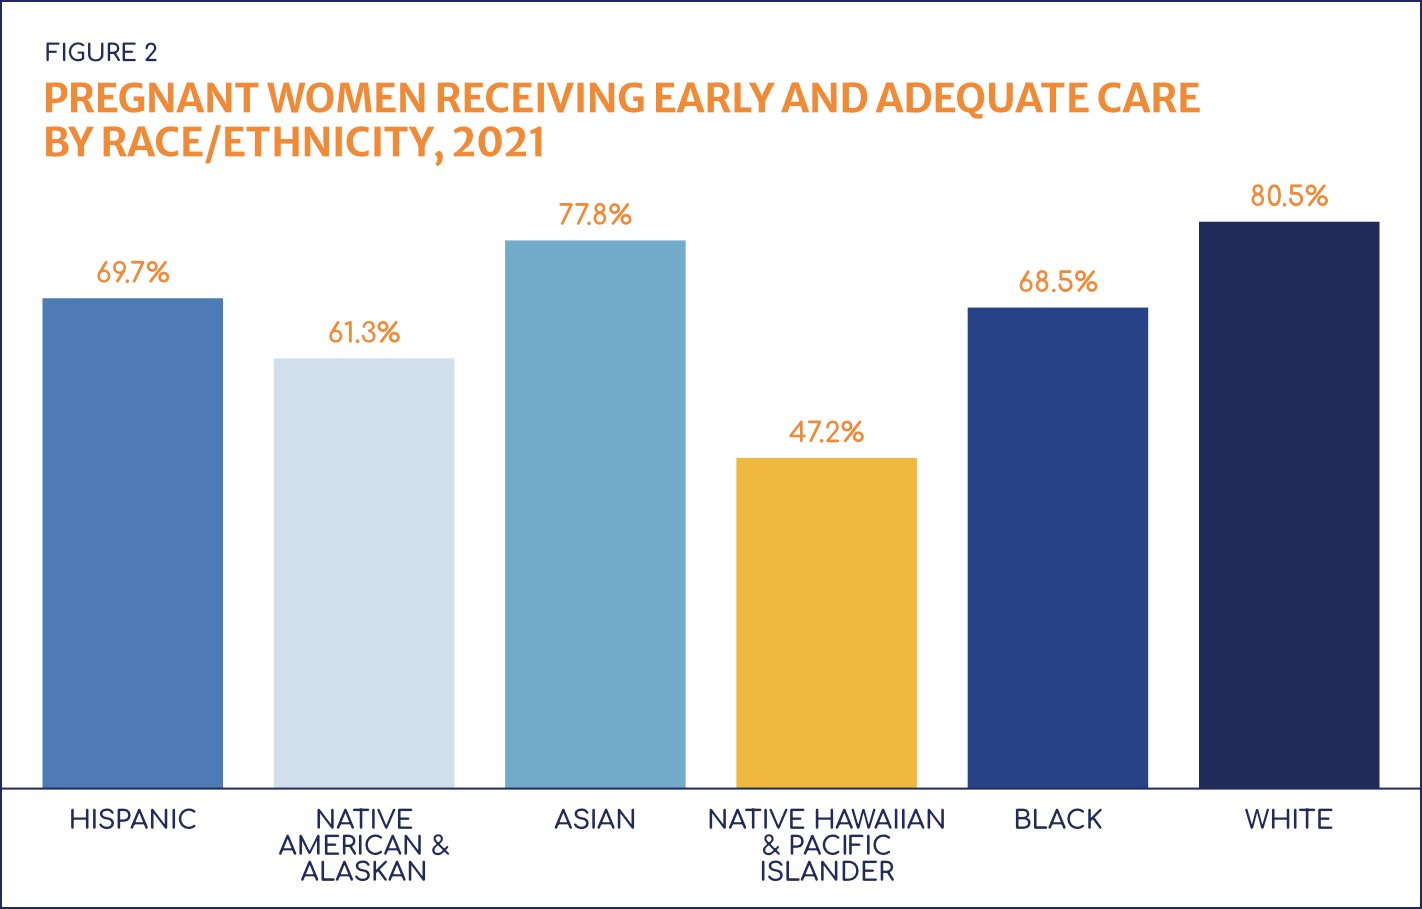 Graph showing percentage of women receiving early and adequate prenatal care, sorted by race and ethnicity